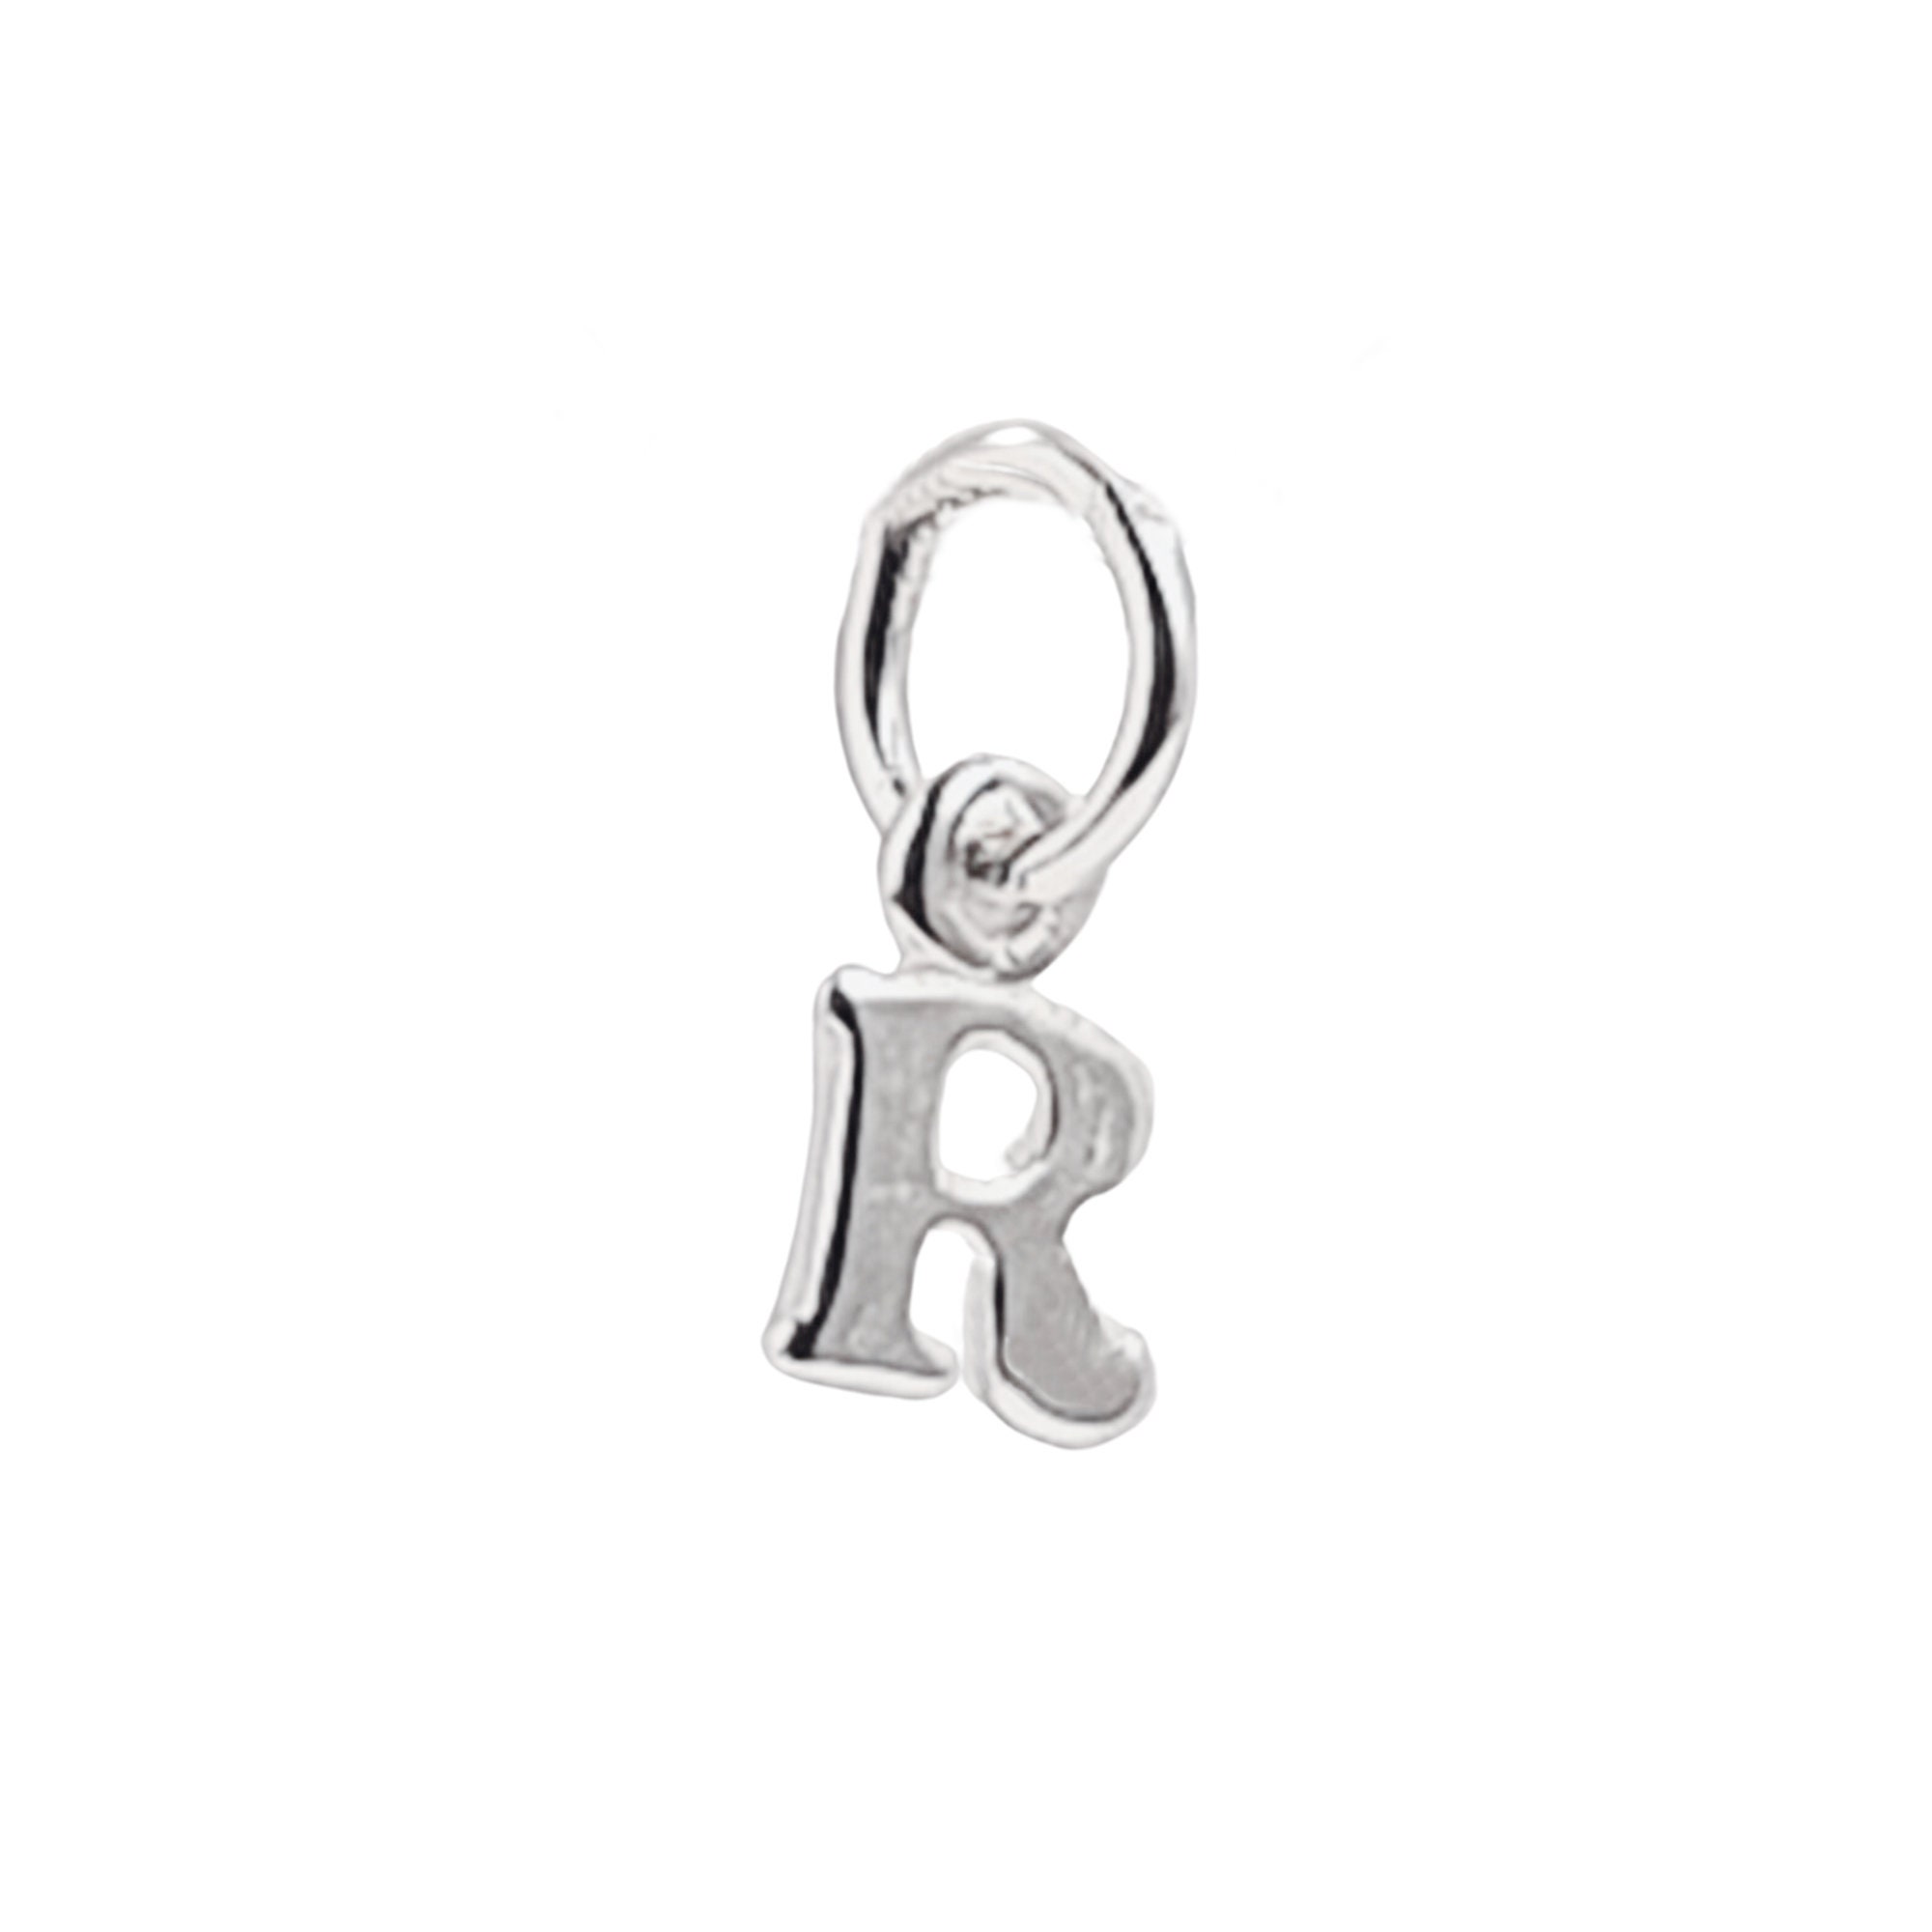 Set of 26 Gold Over Sterling Silver Letter Charms-initial Letter Charms  from A to Z Jewelry Wholesale Permanent Charms SKU: 201057-VM 